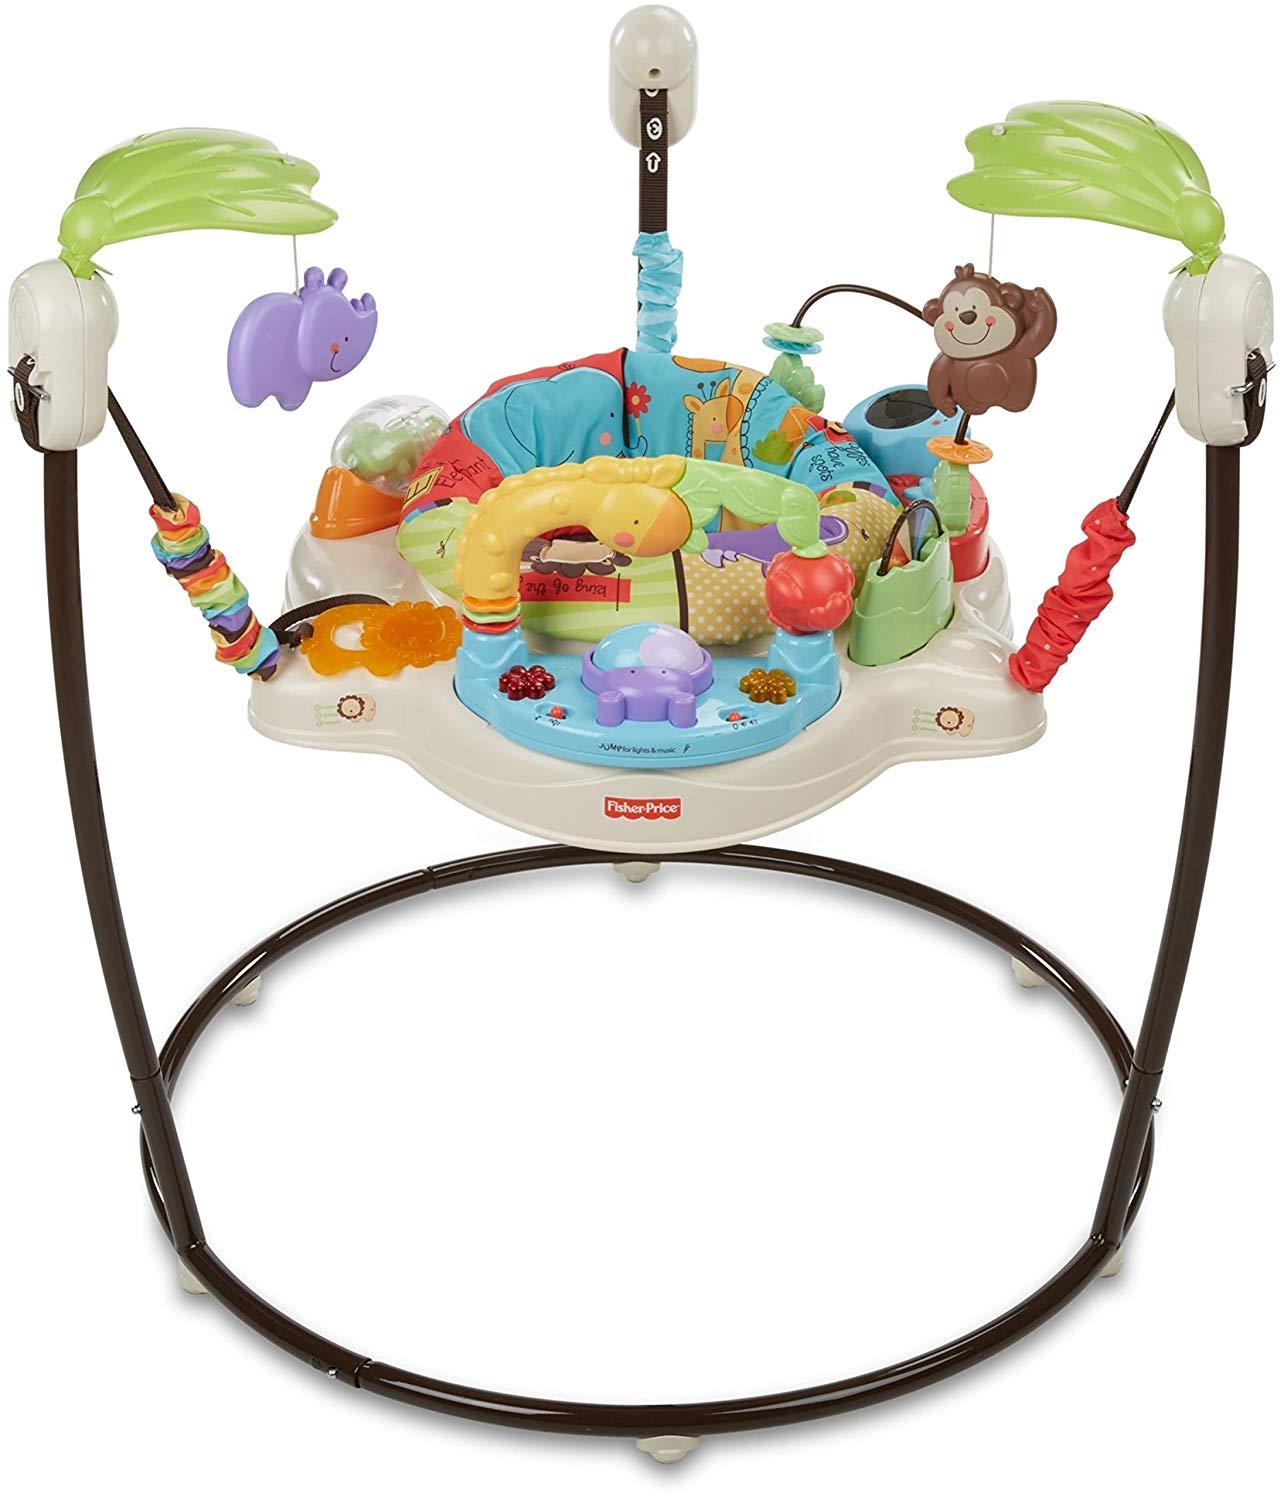 how long in a jumperoo